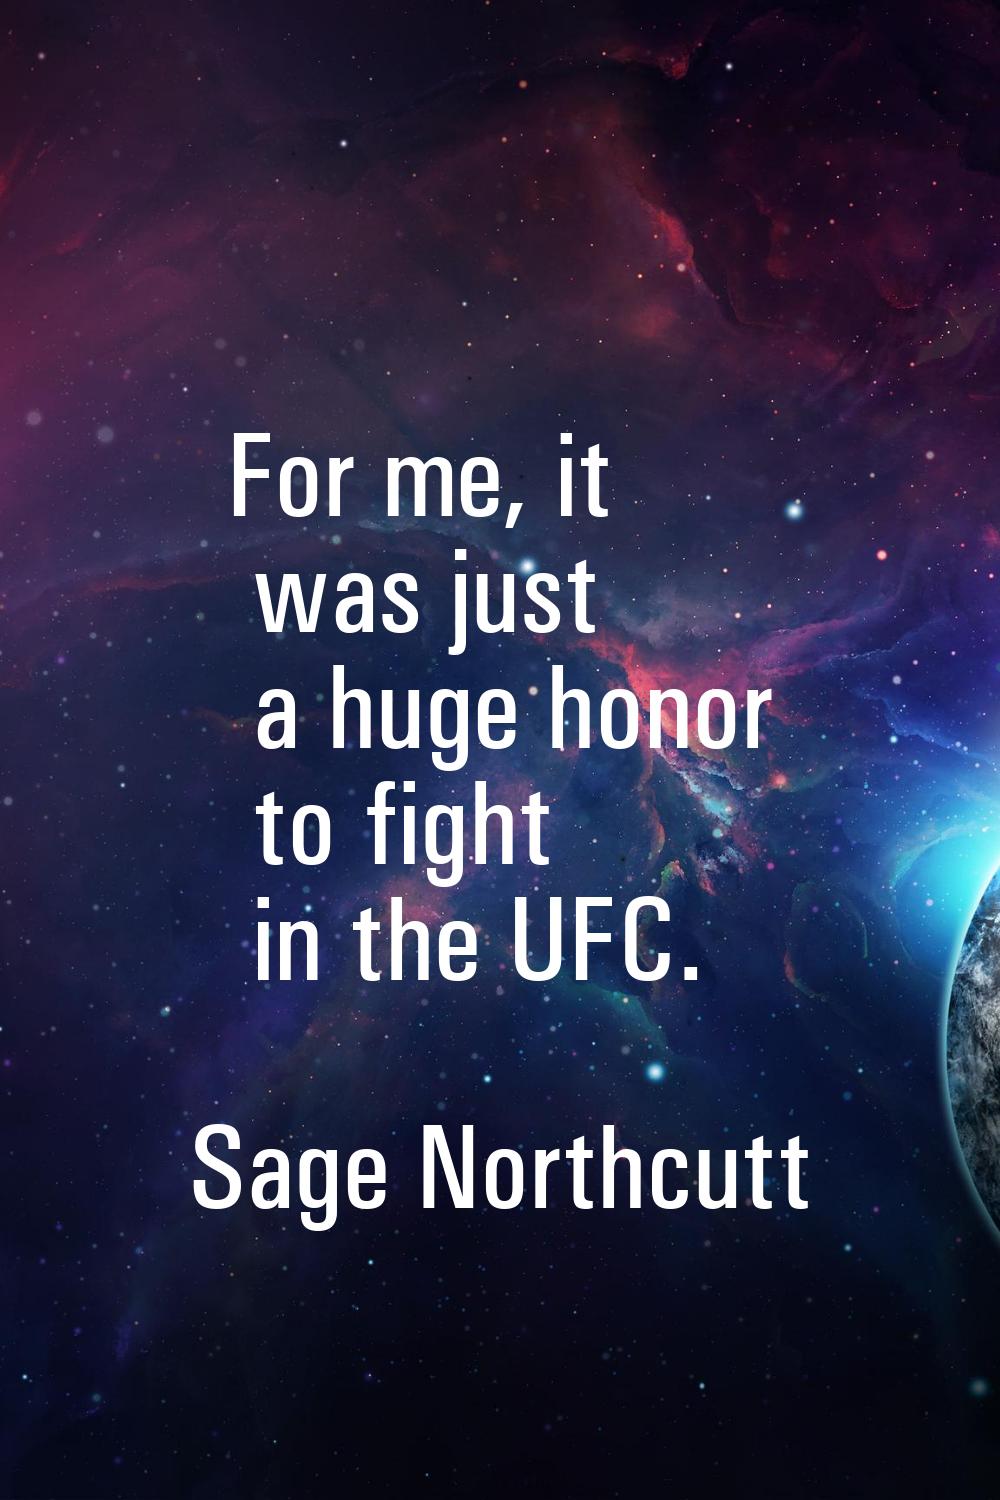 For me, it was just a huge honor to fight in the UFC.